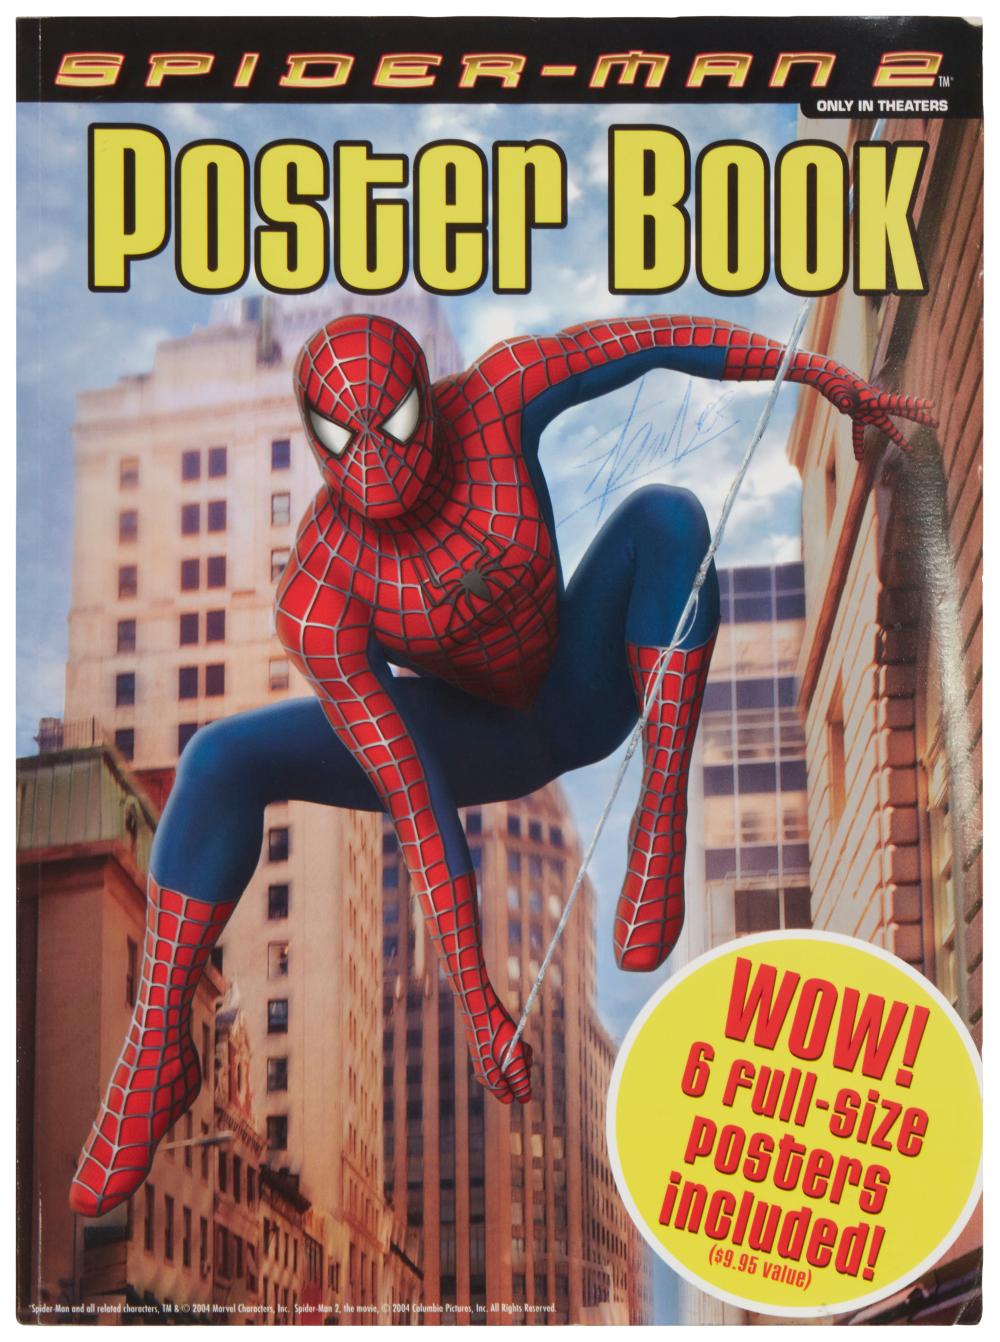 A "SPIDER-MAN 2" POSTER BOOK SIGNED